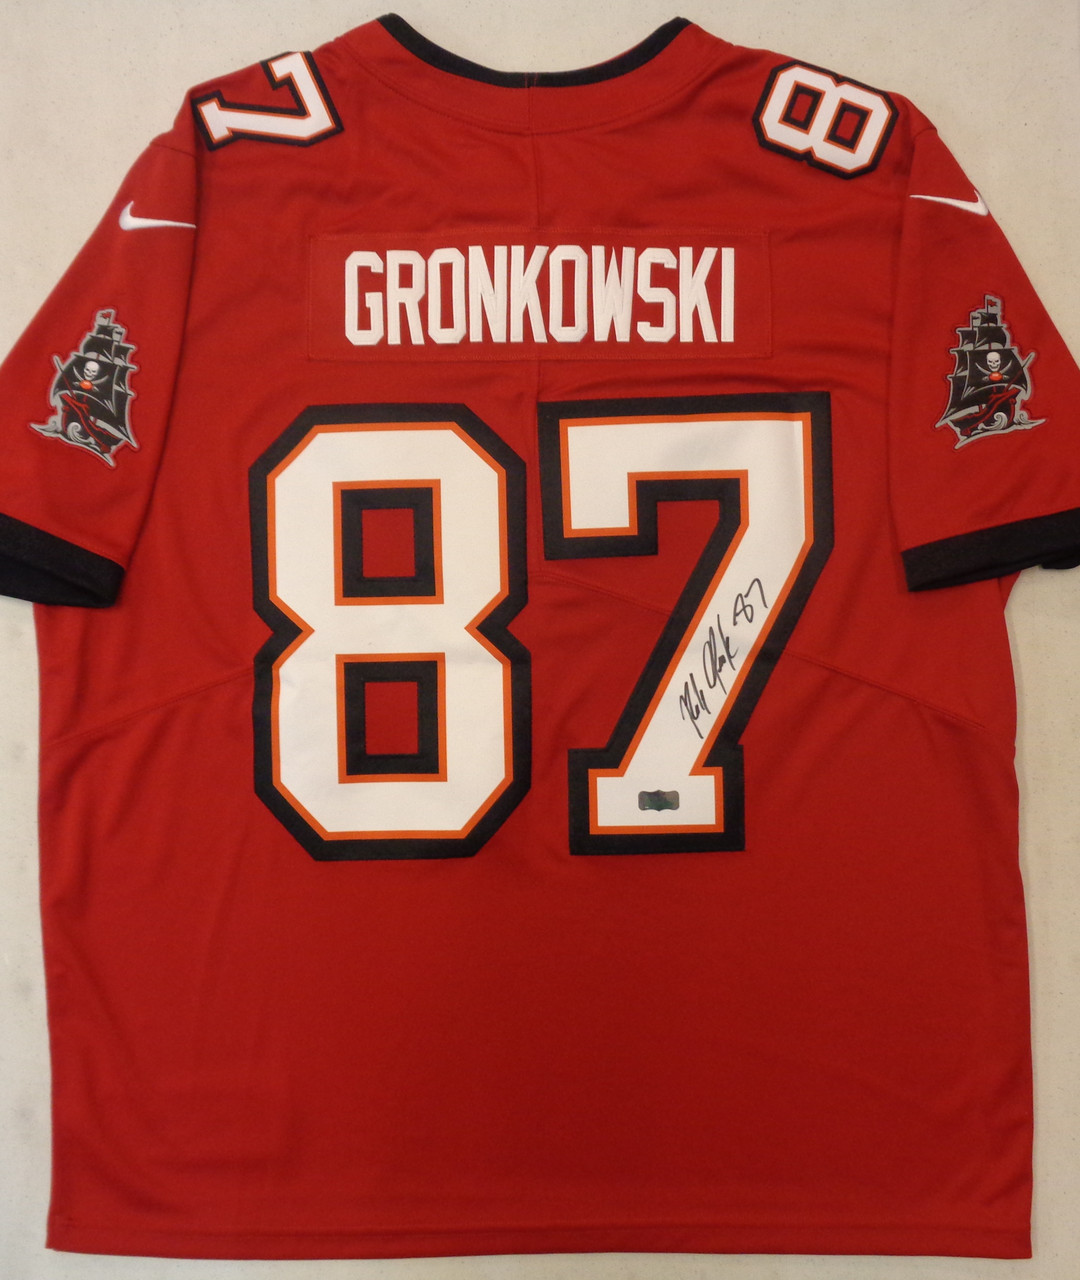 Rob Gronkowski Tampa Bay Buccaneers Nike Vapor Limited Jersey - Red